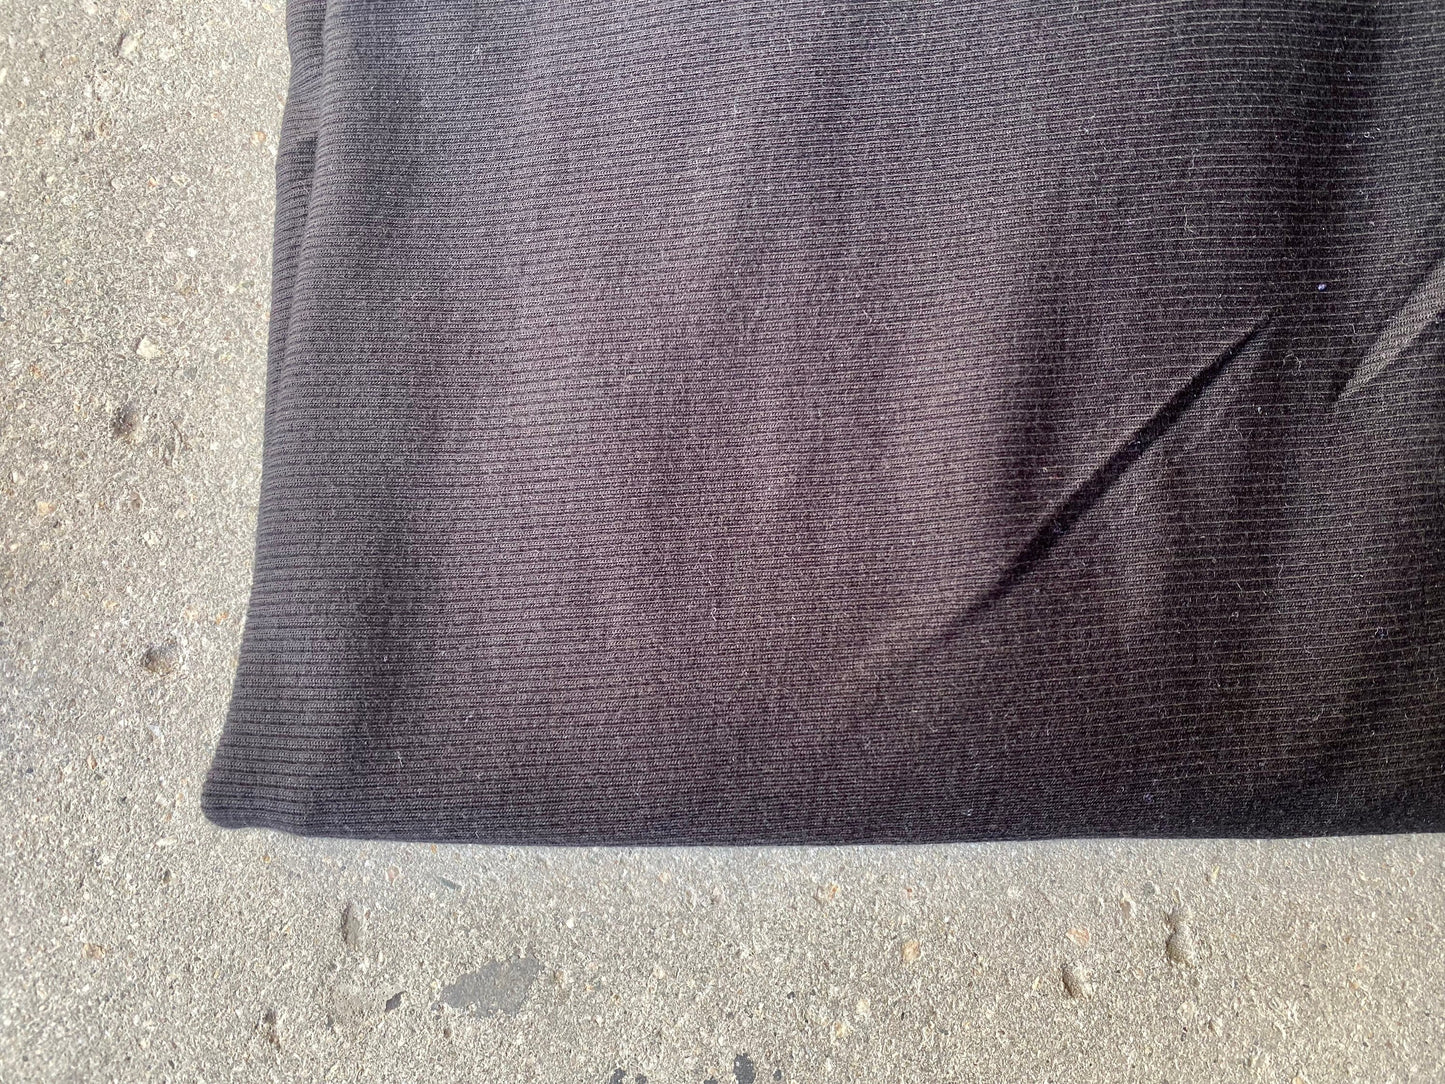 Bamboo Spandex 2x1 Rib Knit Fabric By The Yard For Blouse, Shirt, Dress, Underwear, Intimates, Crop Top or Baby Clothes